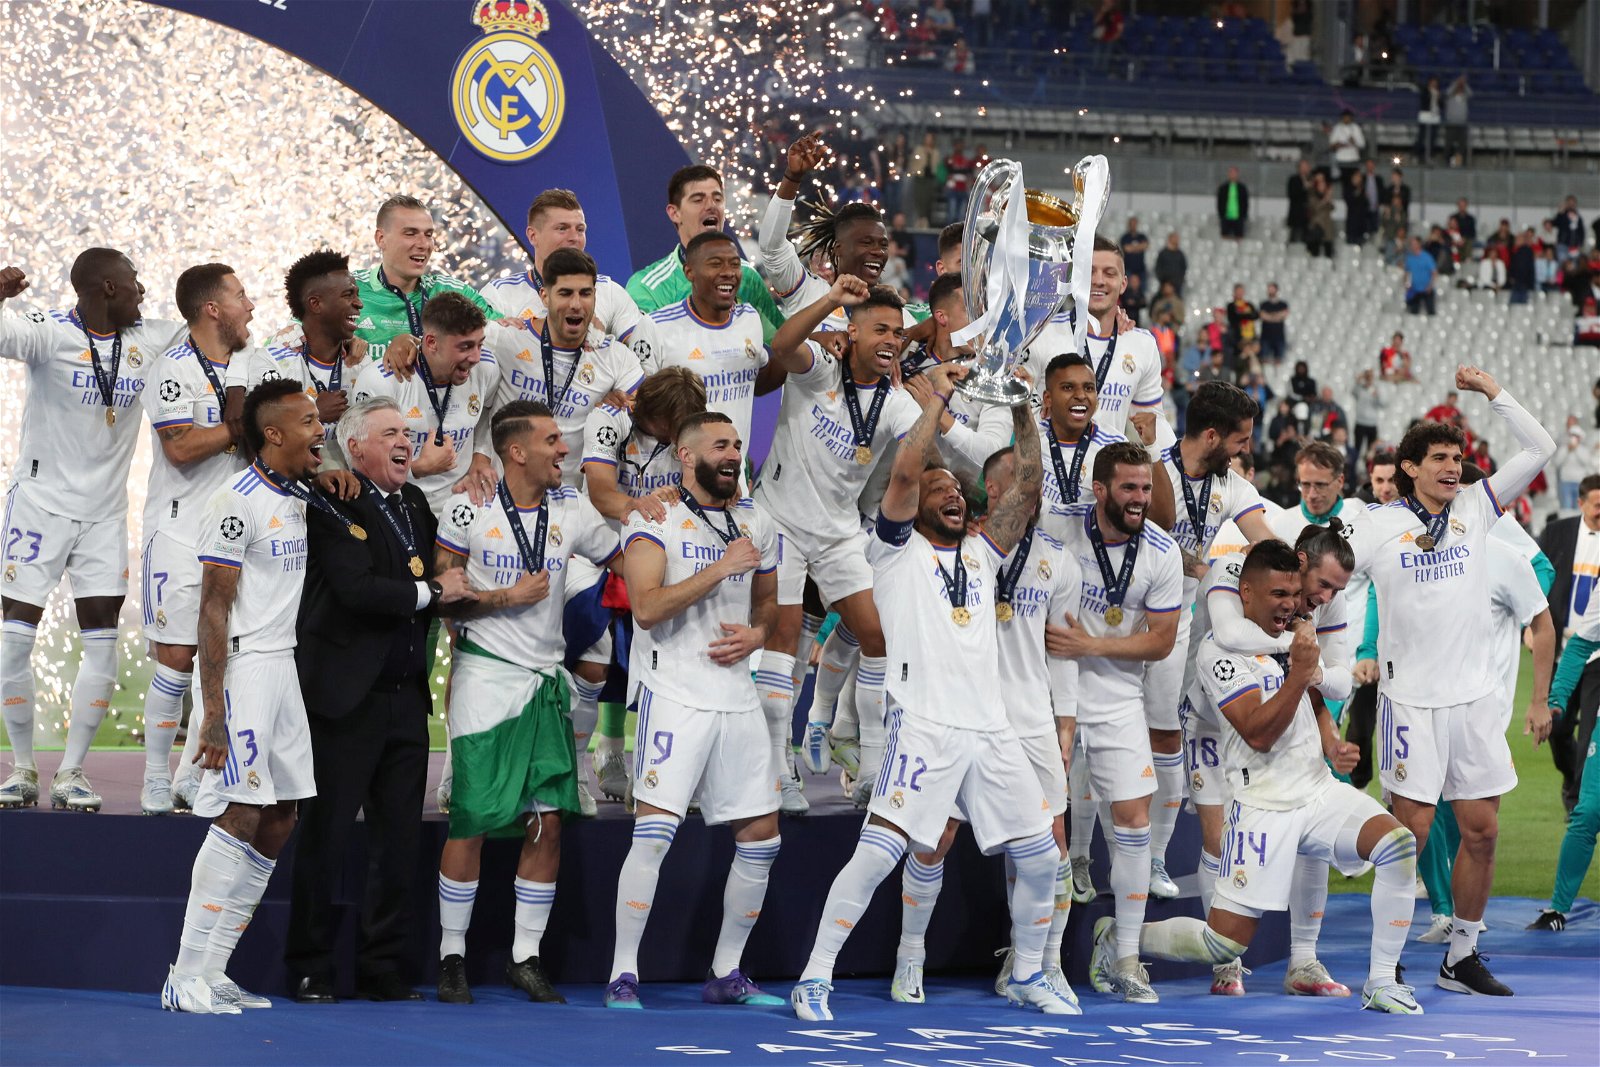 Spanish teams with most Champions League trophies & titles